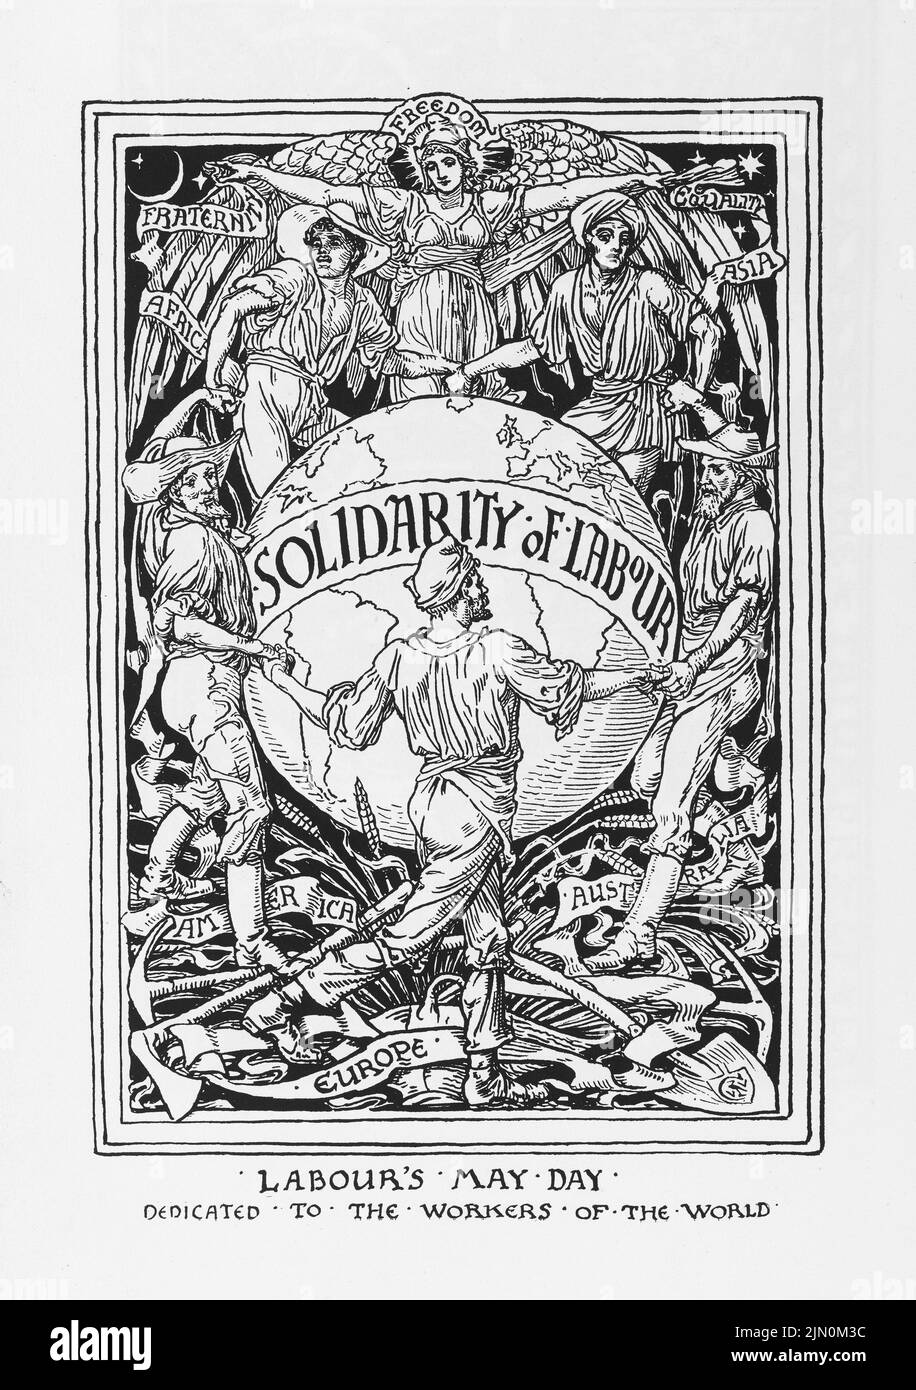 Solidarity of Labour, Labour's May Day. Illustration by Walter Crane from Cartoons for the Cause 1886-1896, International Socialist Workers. Stock Photo